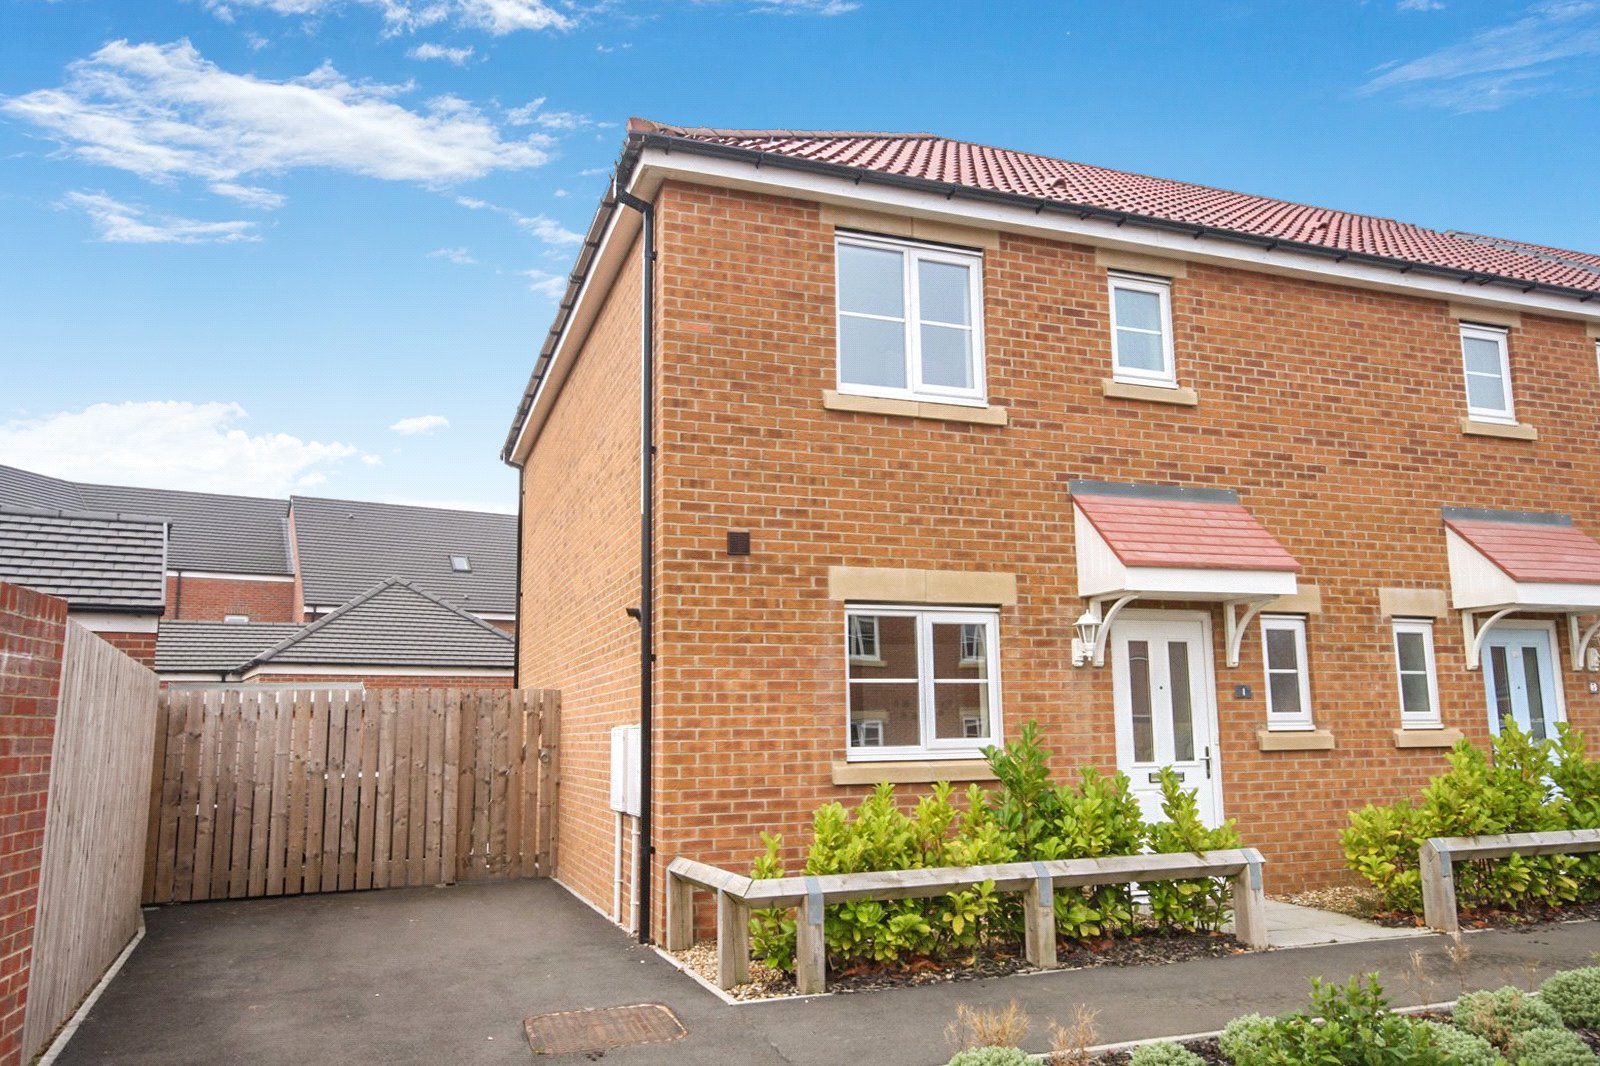 3 bed house for sale in Dorado Close, Stockton-on-Tees - Property Image 1